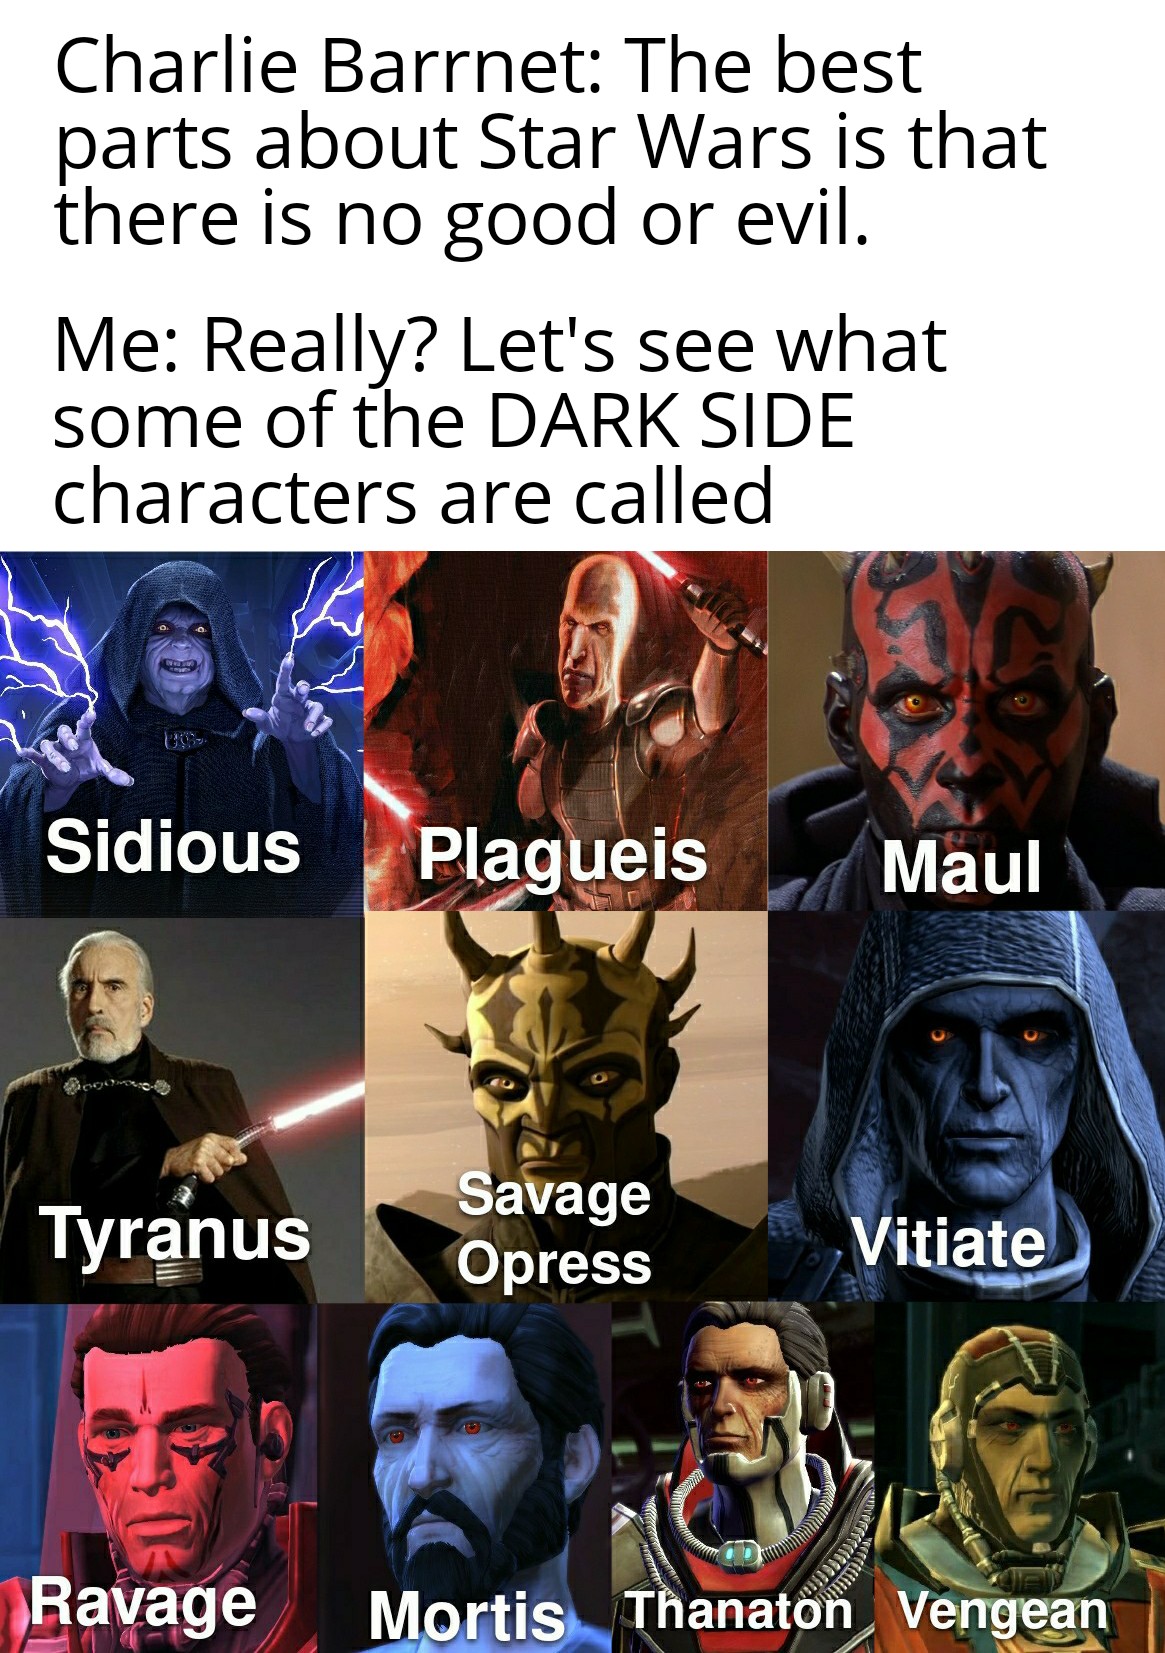 funny memes and pcis - t shirt - Charlie Barrnet The best parts about Star Wars is that there is no good or evil. Me Really? Let's see what some of the Dark Side characters are called Sidious Plagueis Tyranus Savage Opress Maul Vitiate Ravage Mortis Thana